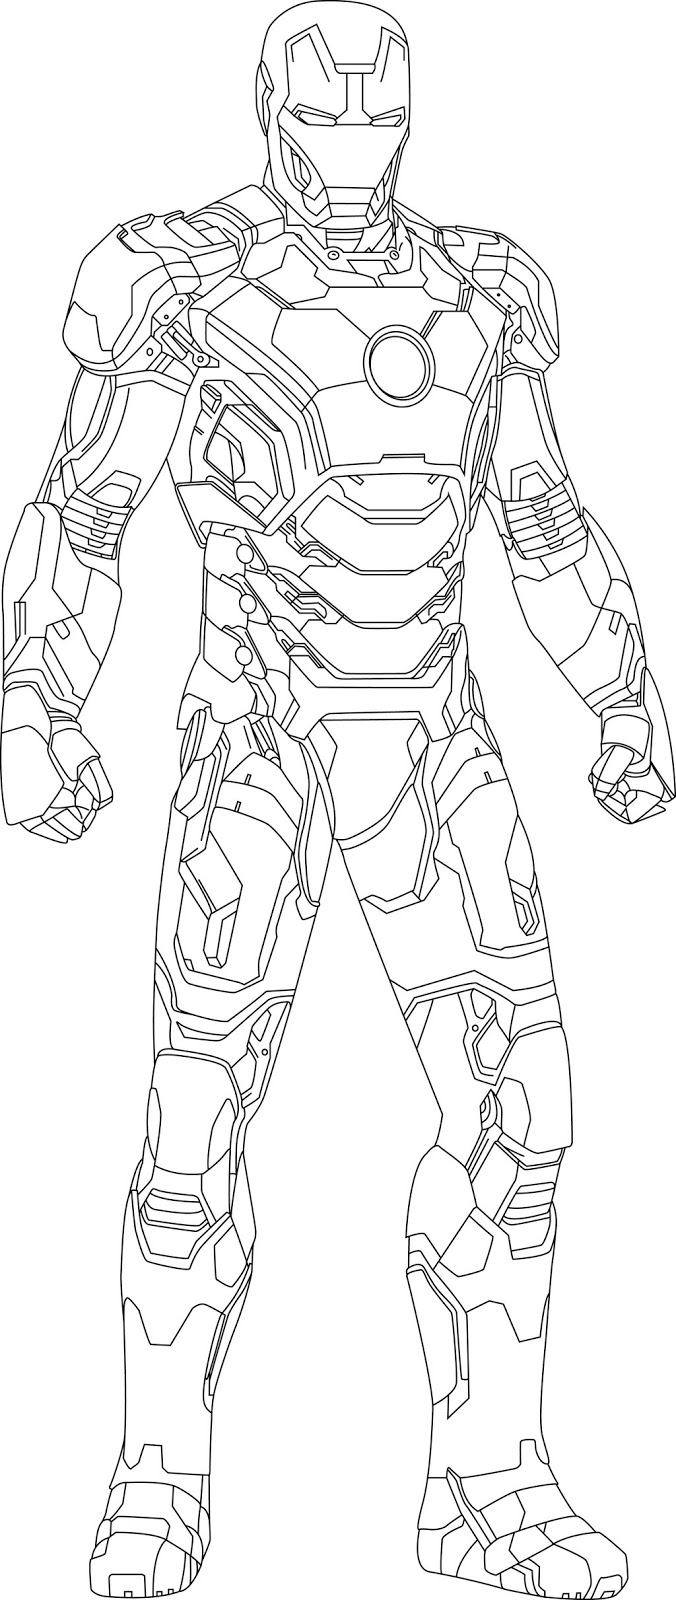 Coloring pages for kids free images Iron Man Avengers